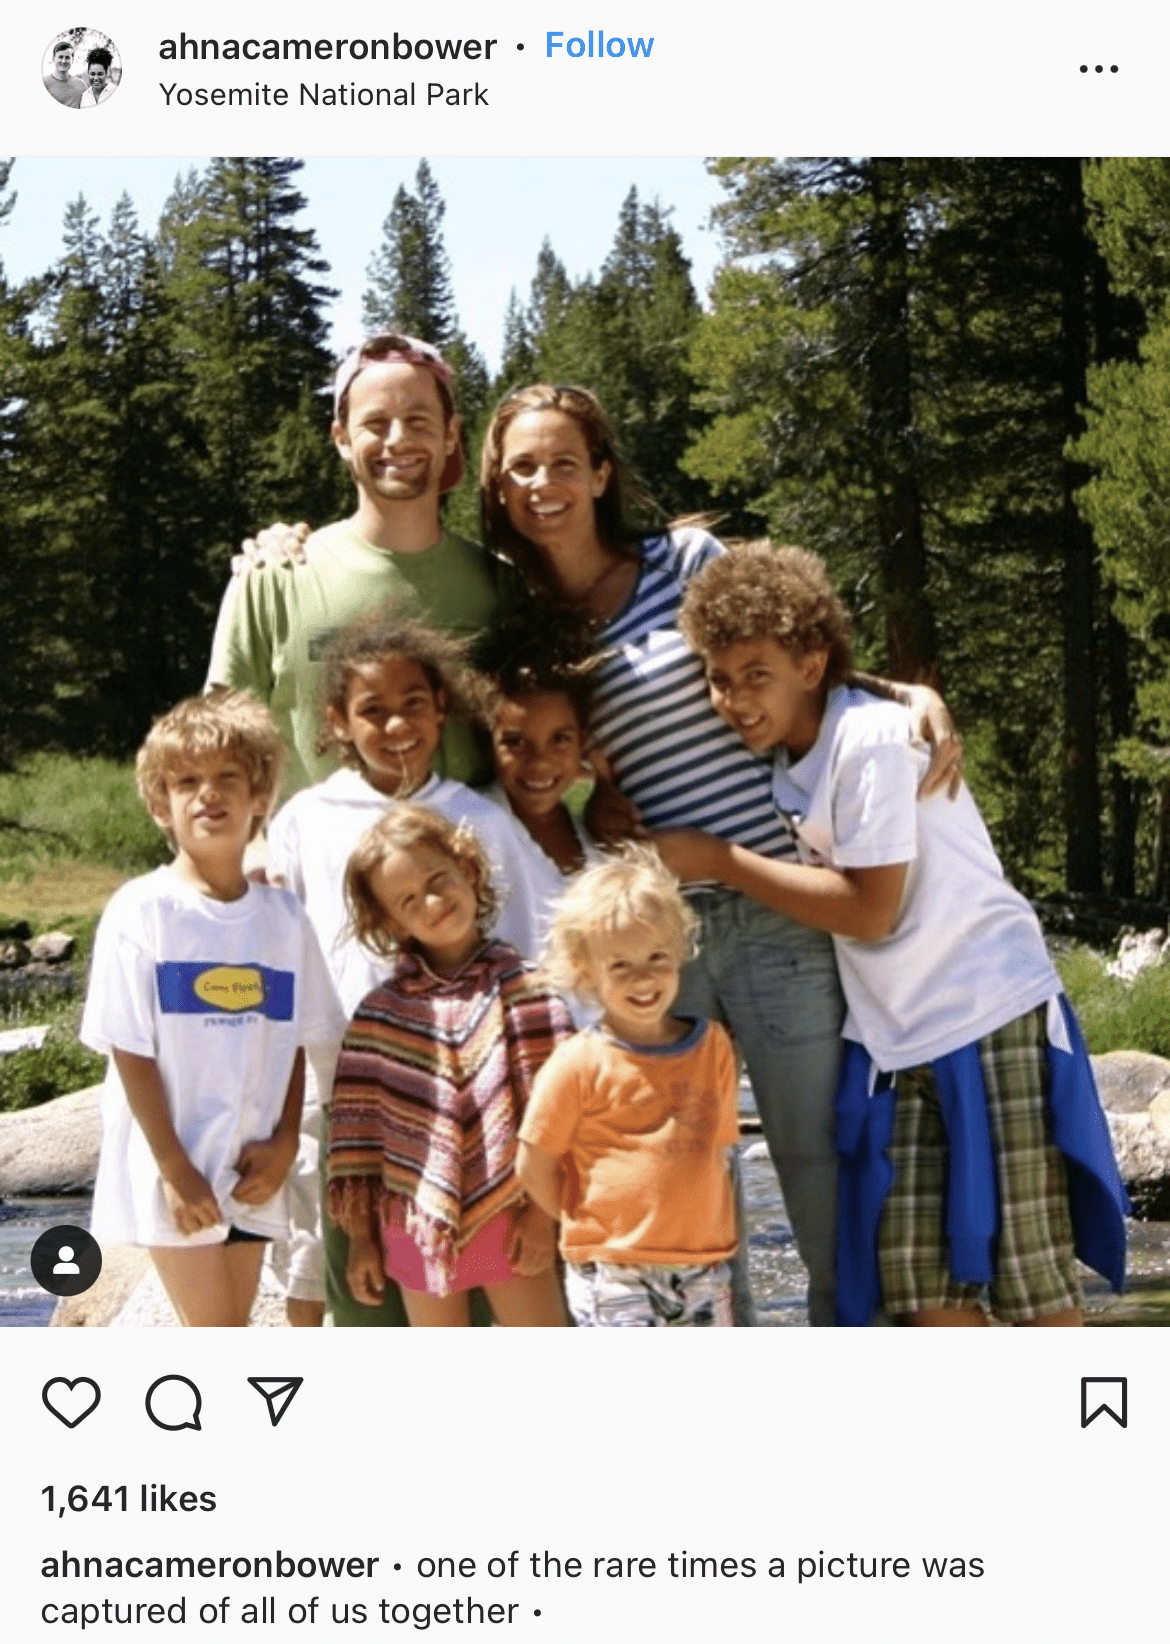 Kirk and Chelsea Cameron with their six children at Yosemite National Park | Photo: Instagram.com/ahnacameronbower